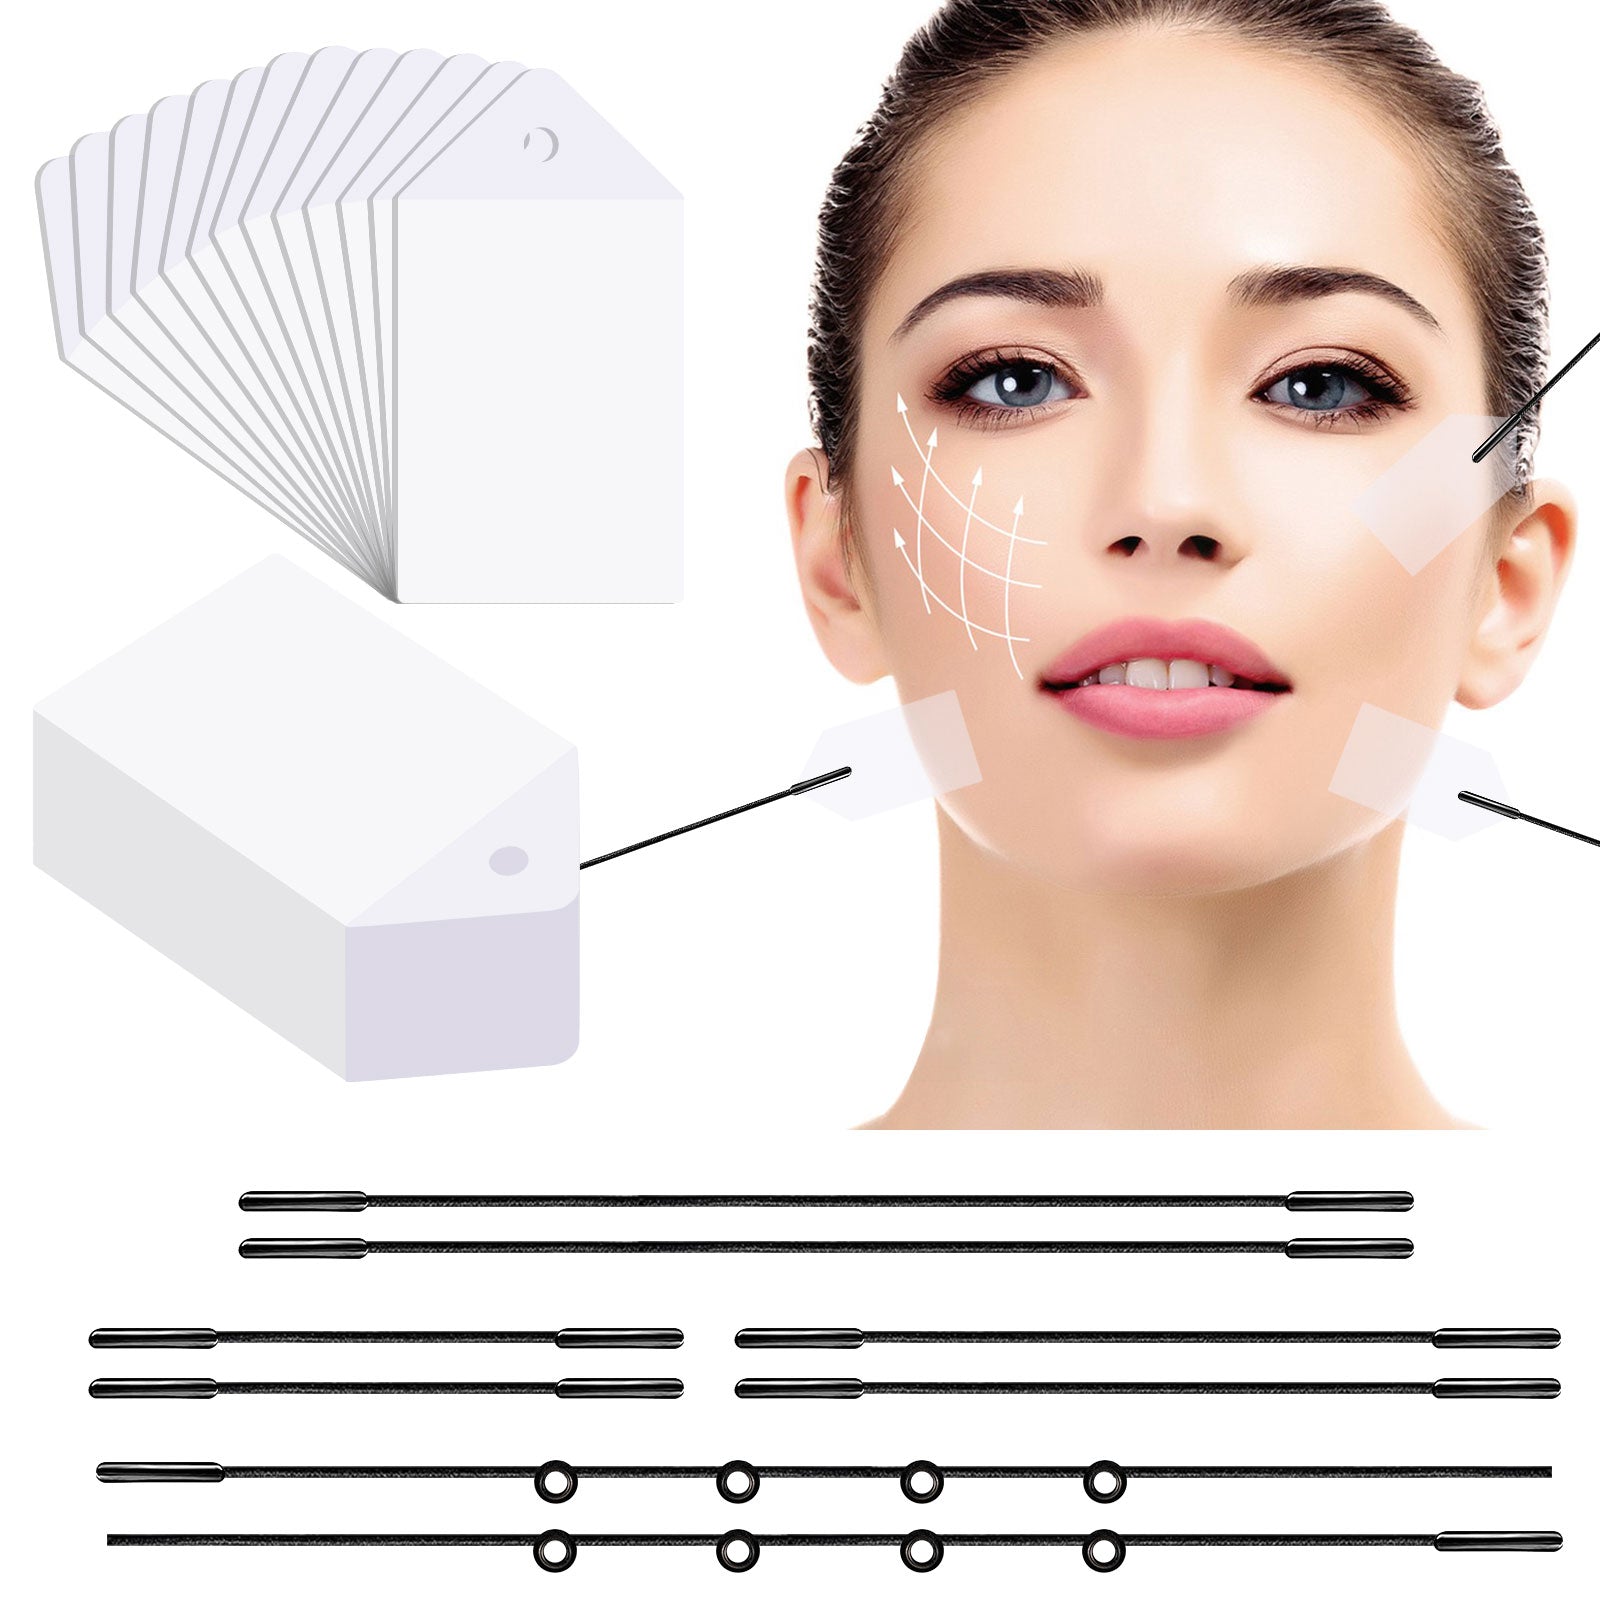 Aliver Instant Face Lifting Tape, Effective and Painless Way to Fight –  Aliver Beauty